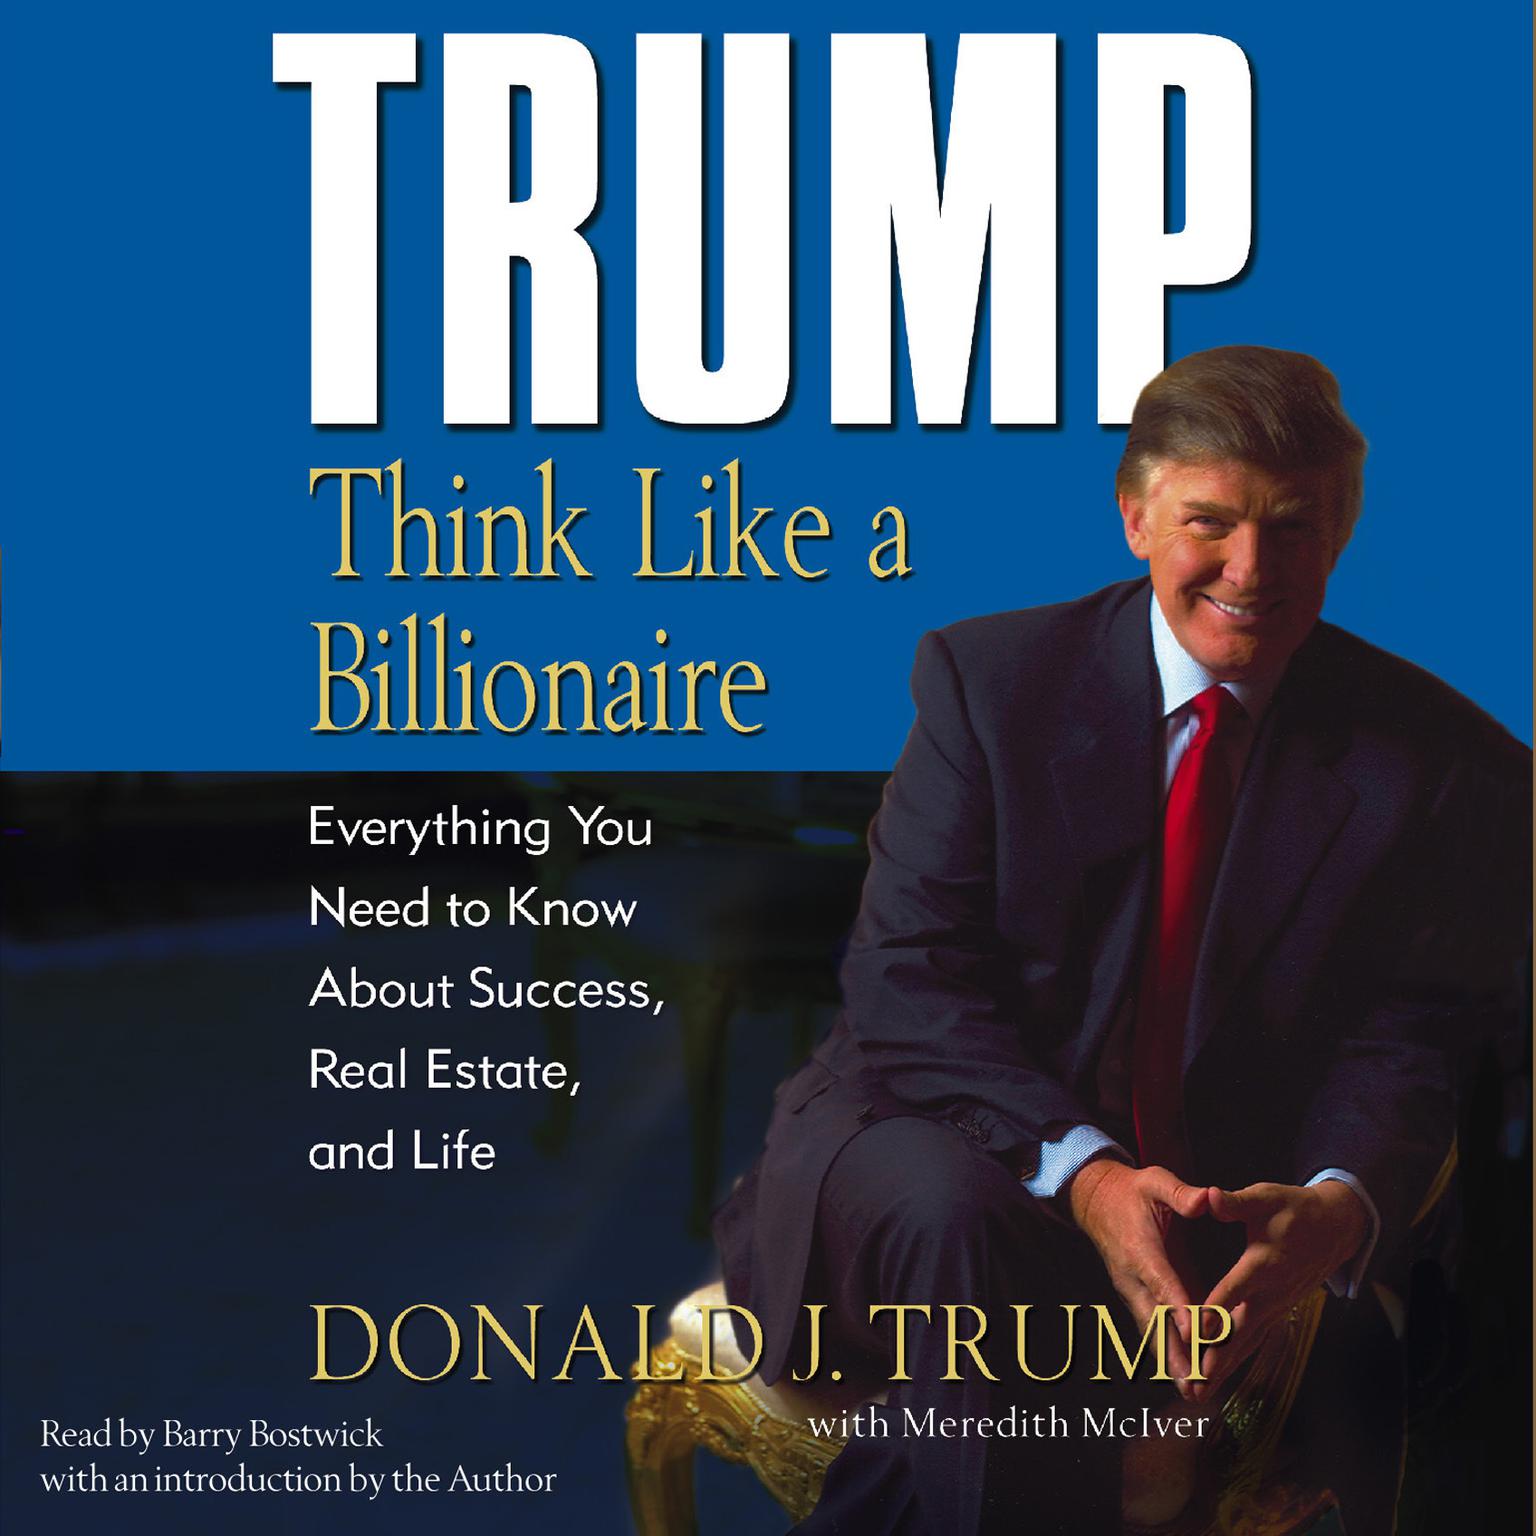 Trump: Think Like a Billionaire: Everything You Need to Know About Success, Real Estate, and Life Audiobook, by Donald J. Trump